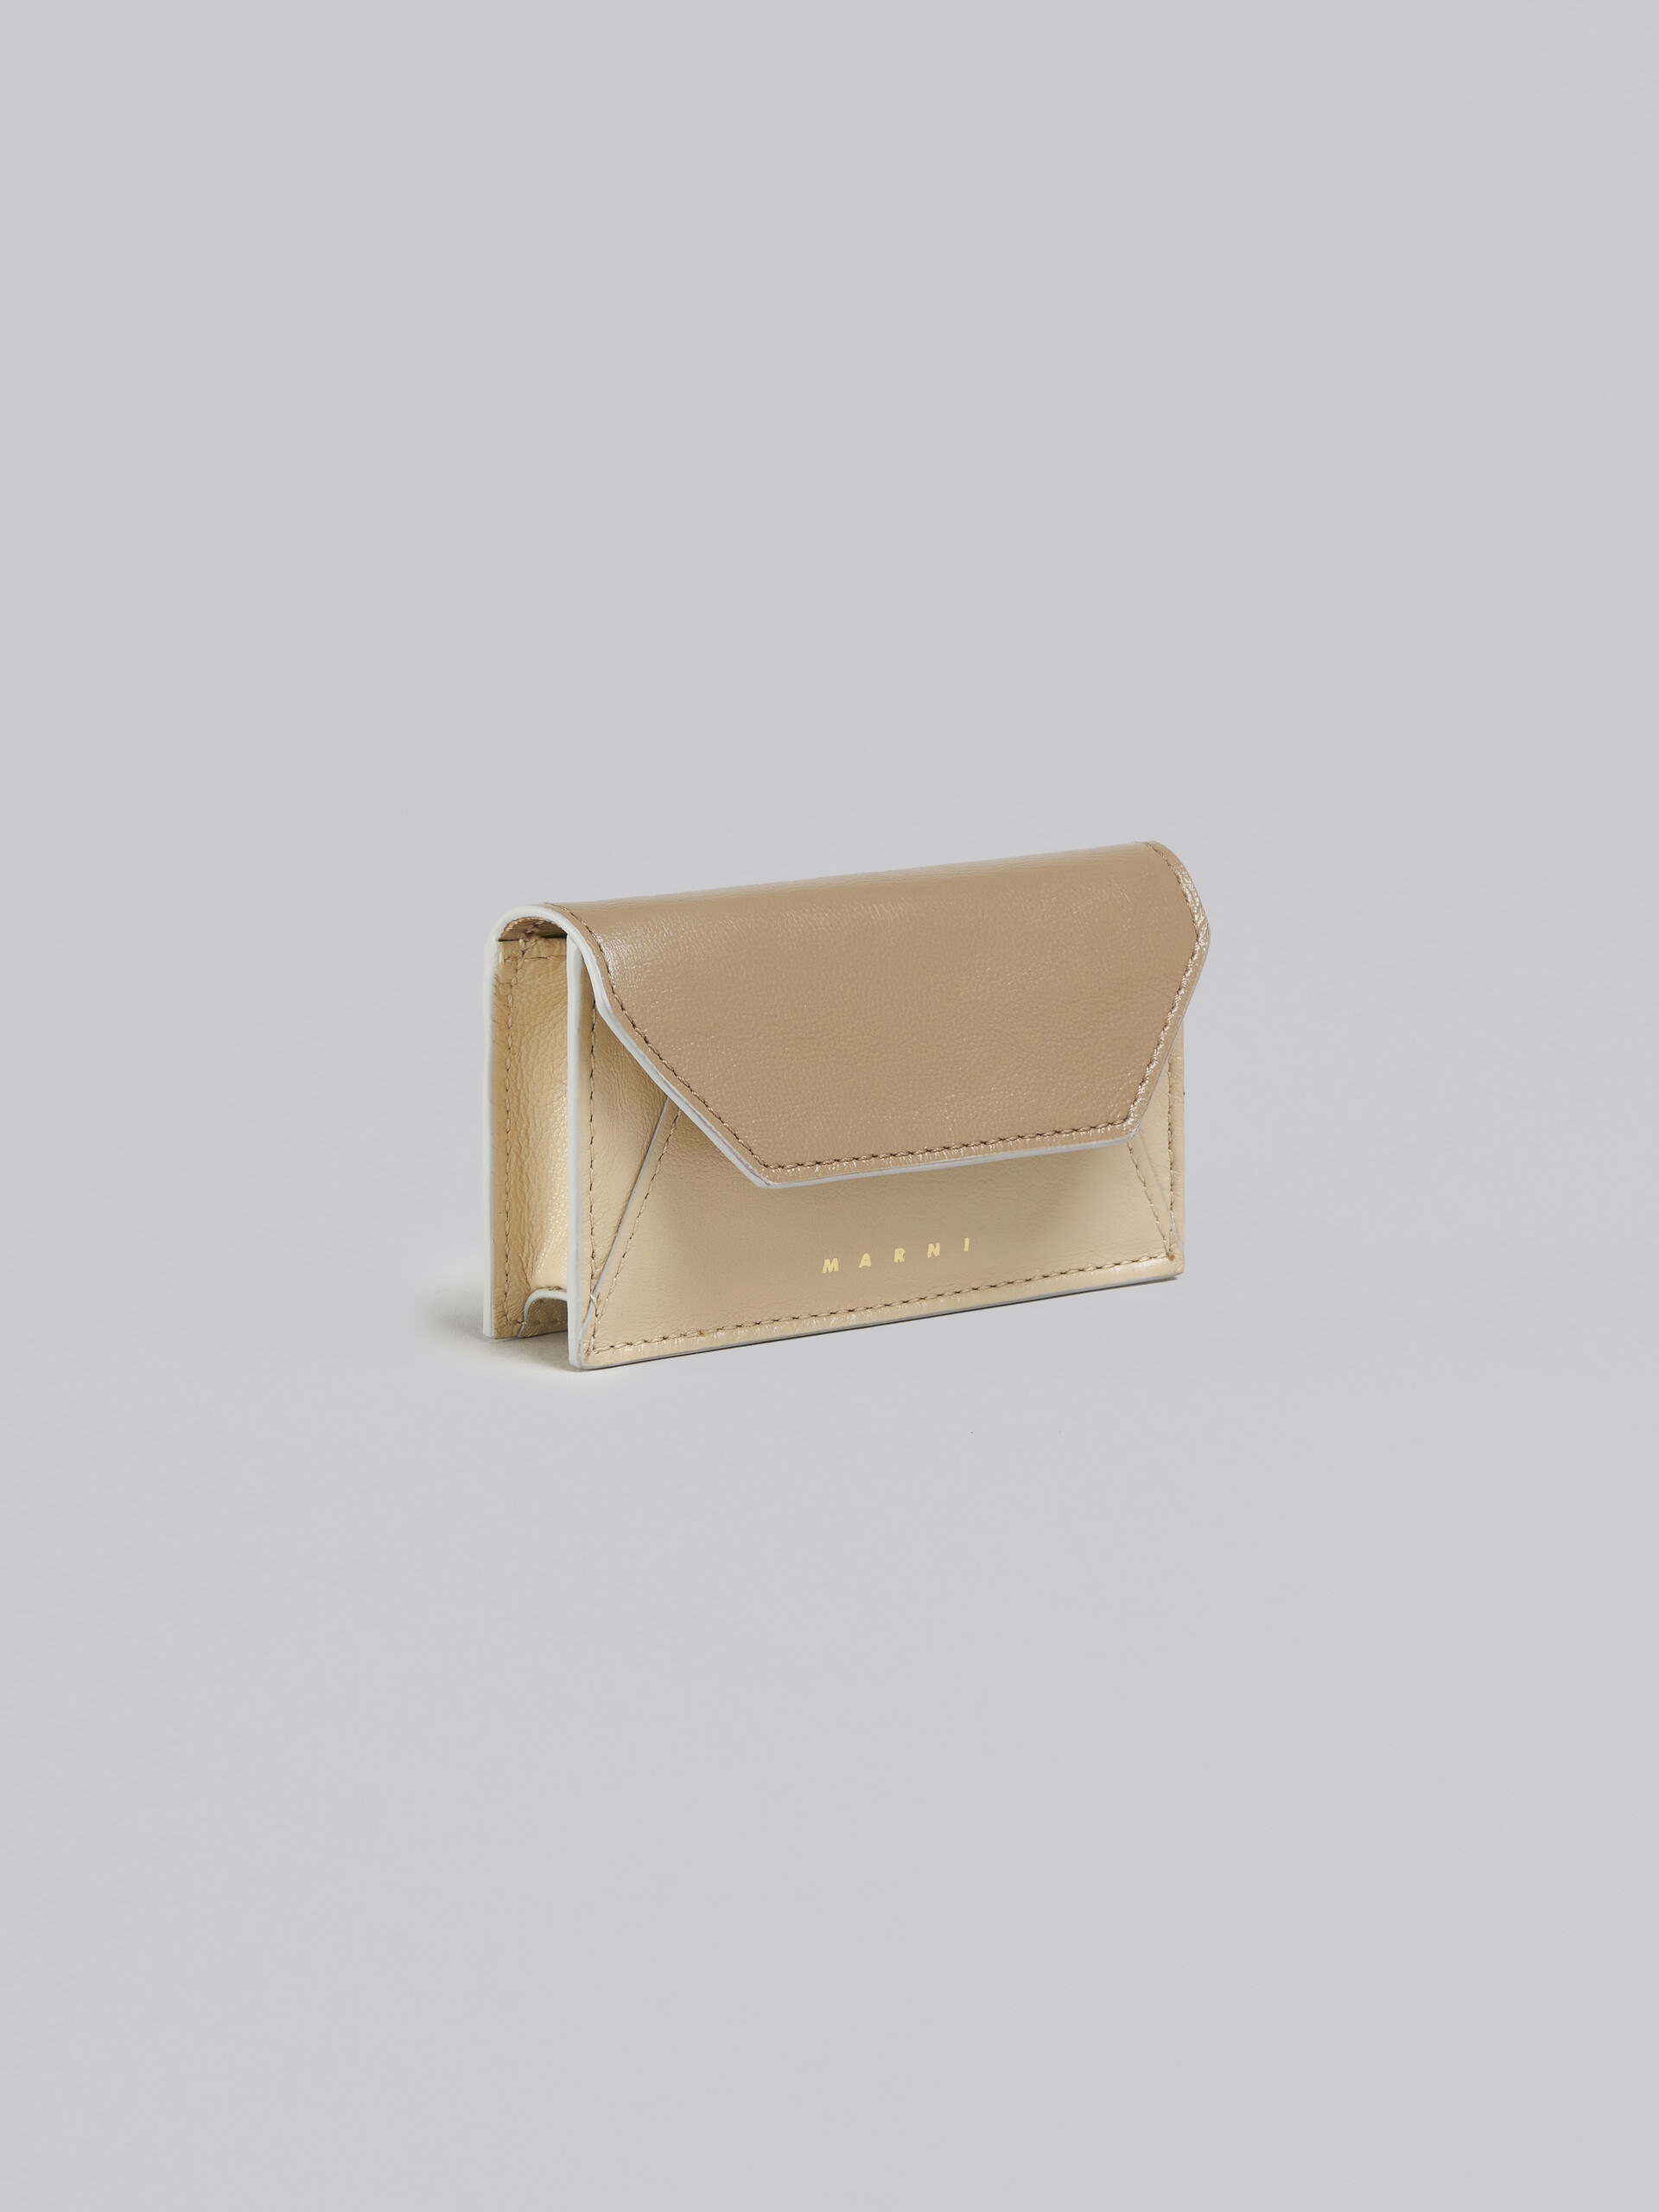 Card case in brown and white leather - Wallets - Image 4